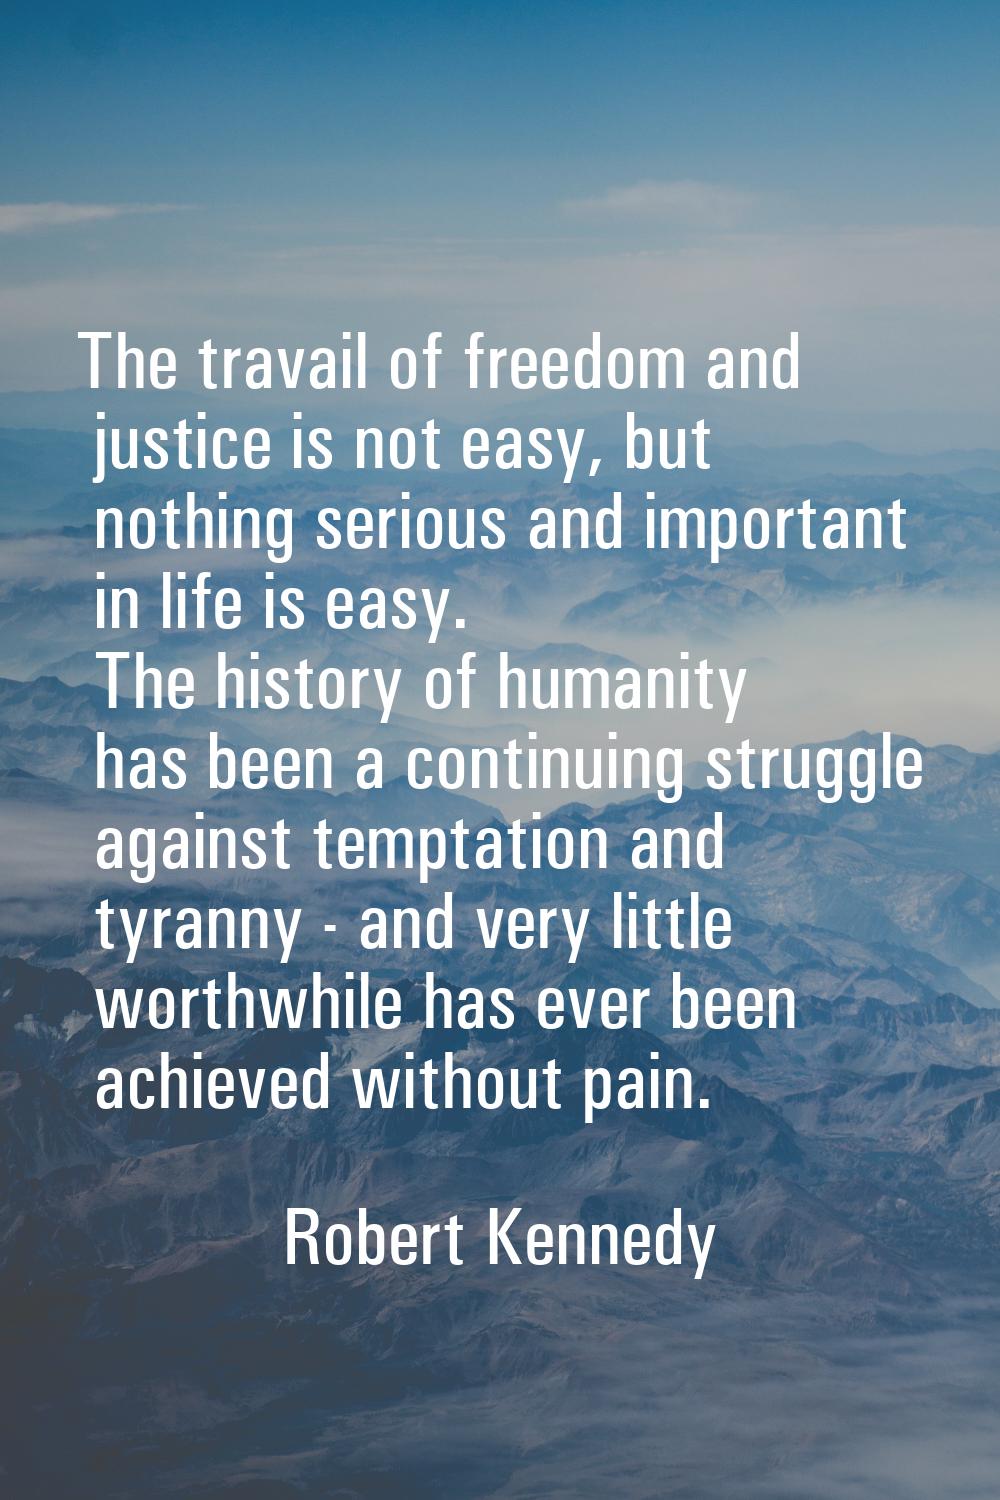 The travail of freedom and justice is not easy, but nothing serious and important in life is easy. 